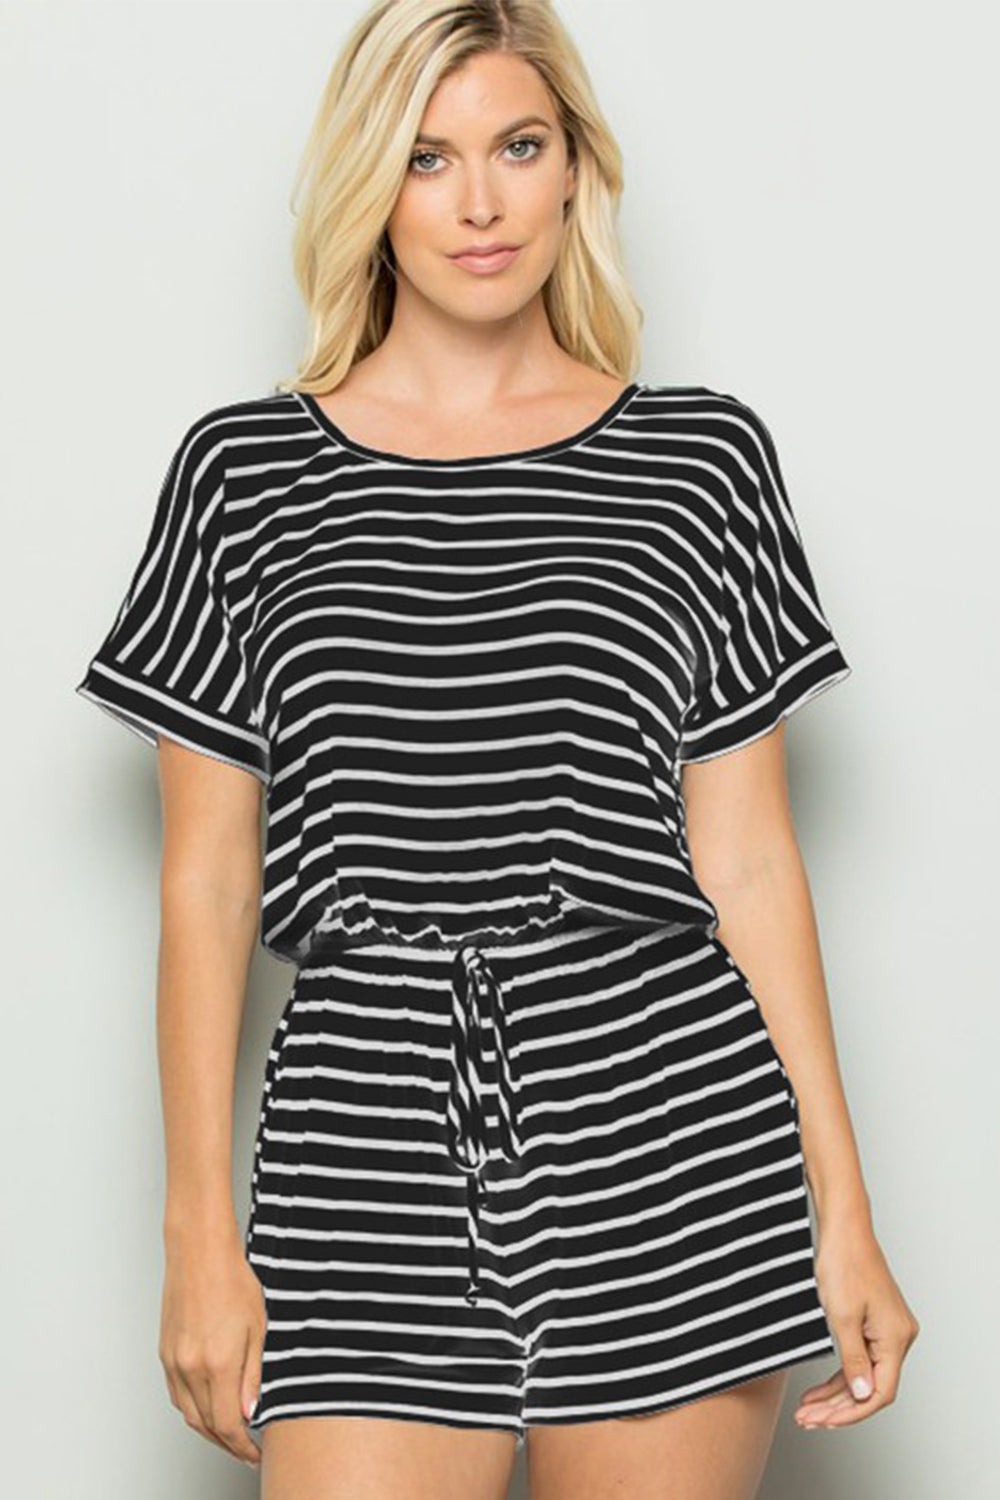 Heimish Full Size Striped Round Neck Short Sleeve Romper-Jumpsuits & Rompers-Inspired by Justeen-Women's Clothing Boutique in Chicago, Illinois